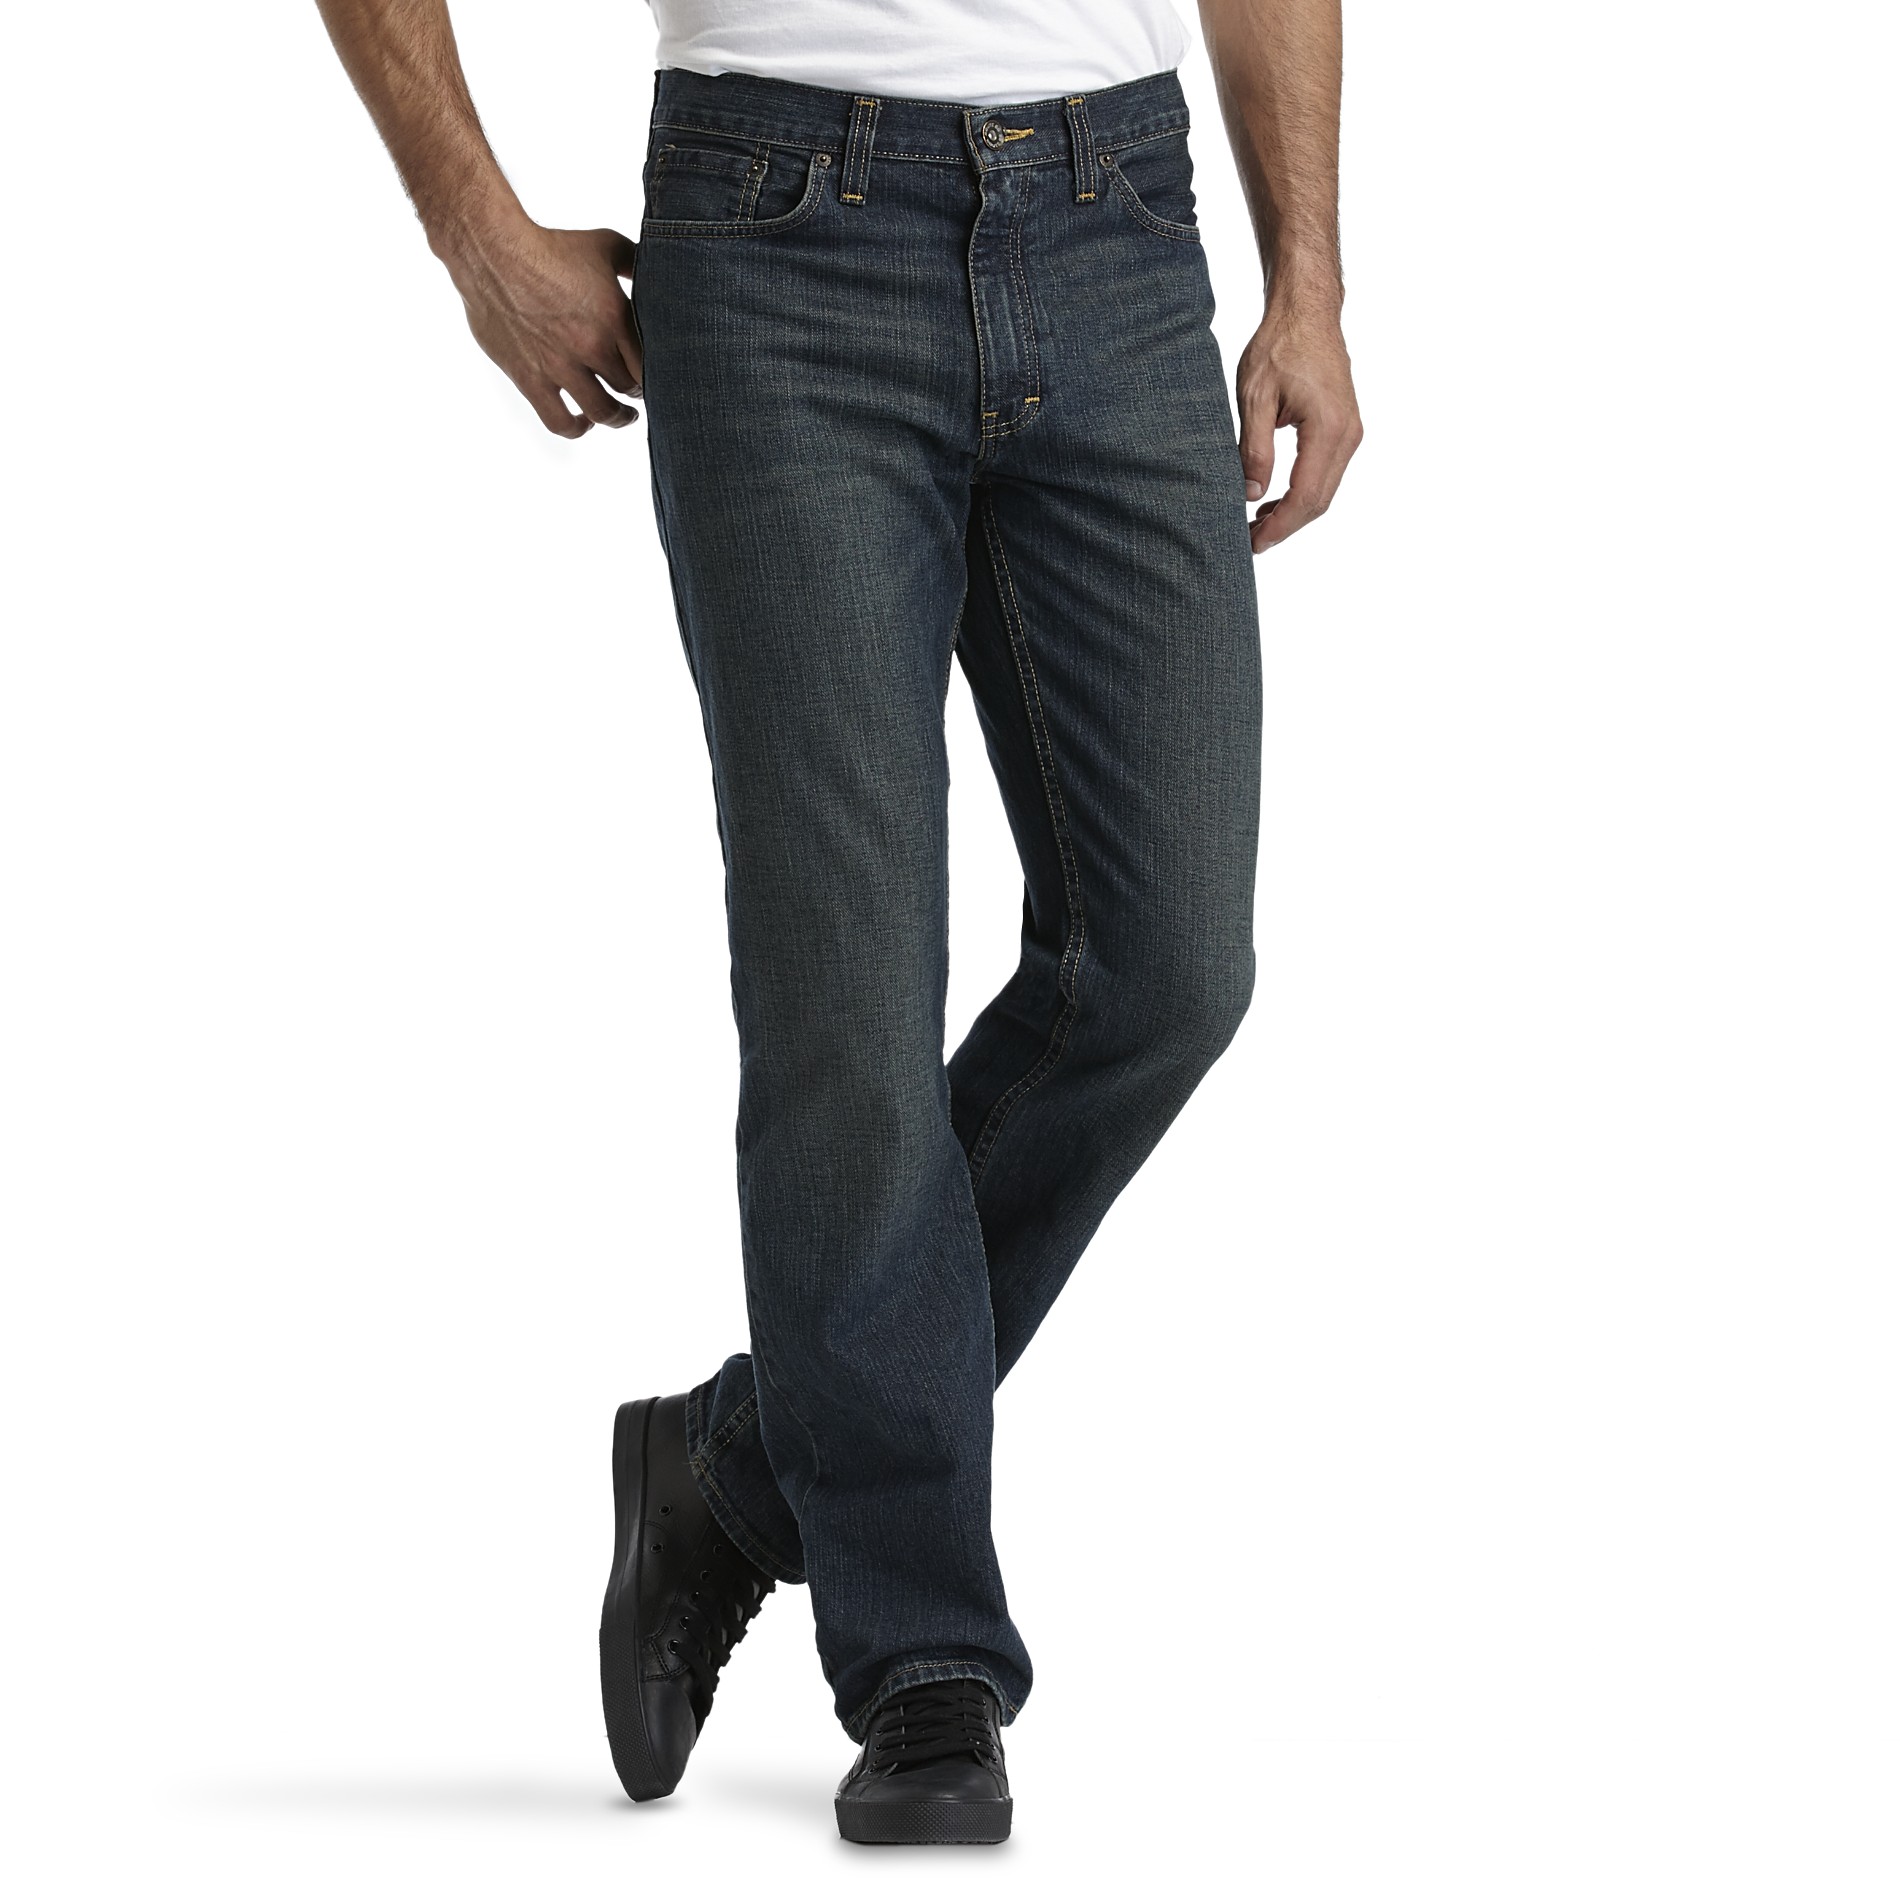 Straight Leg Denim Jeans: Get Out In Style with Kmart